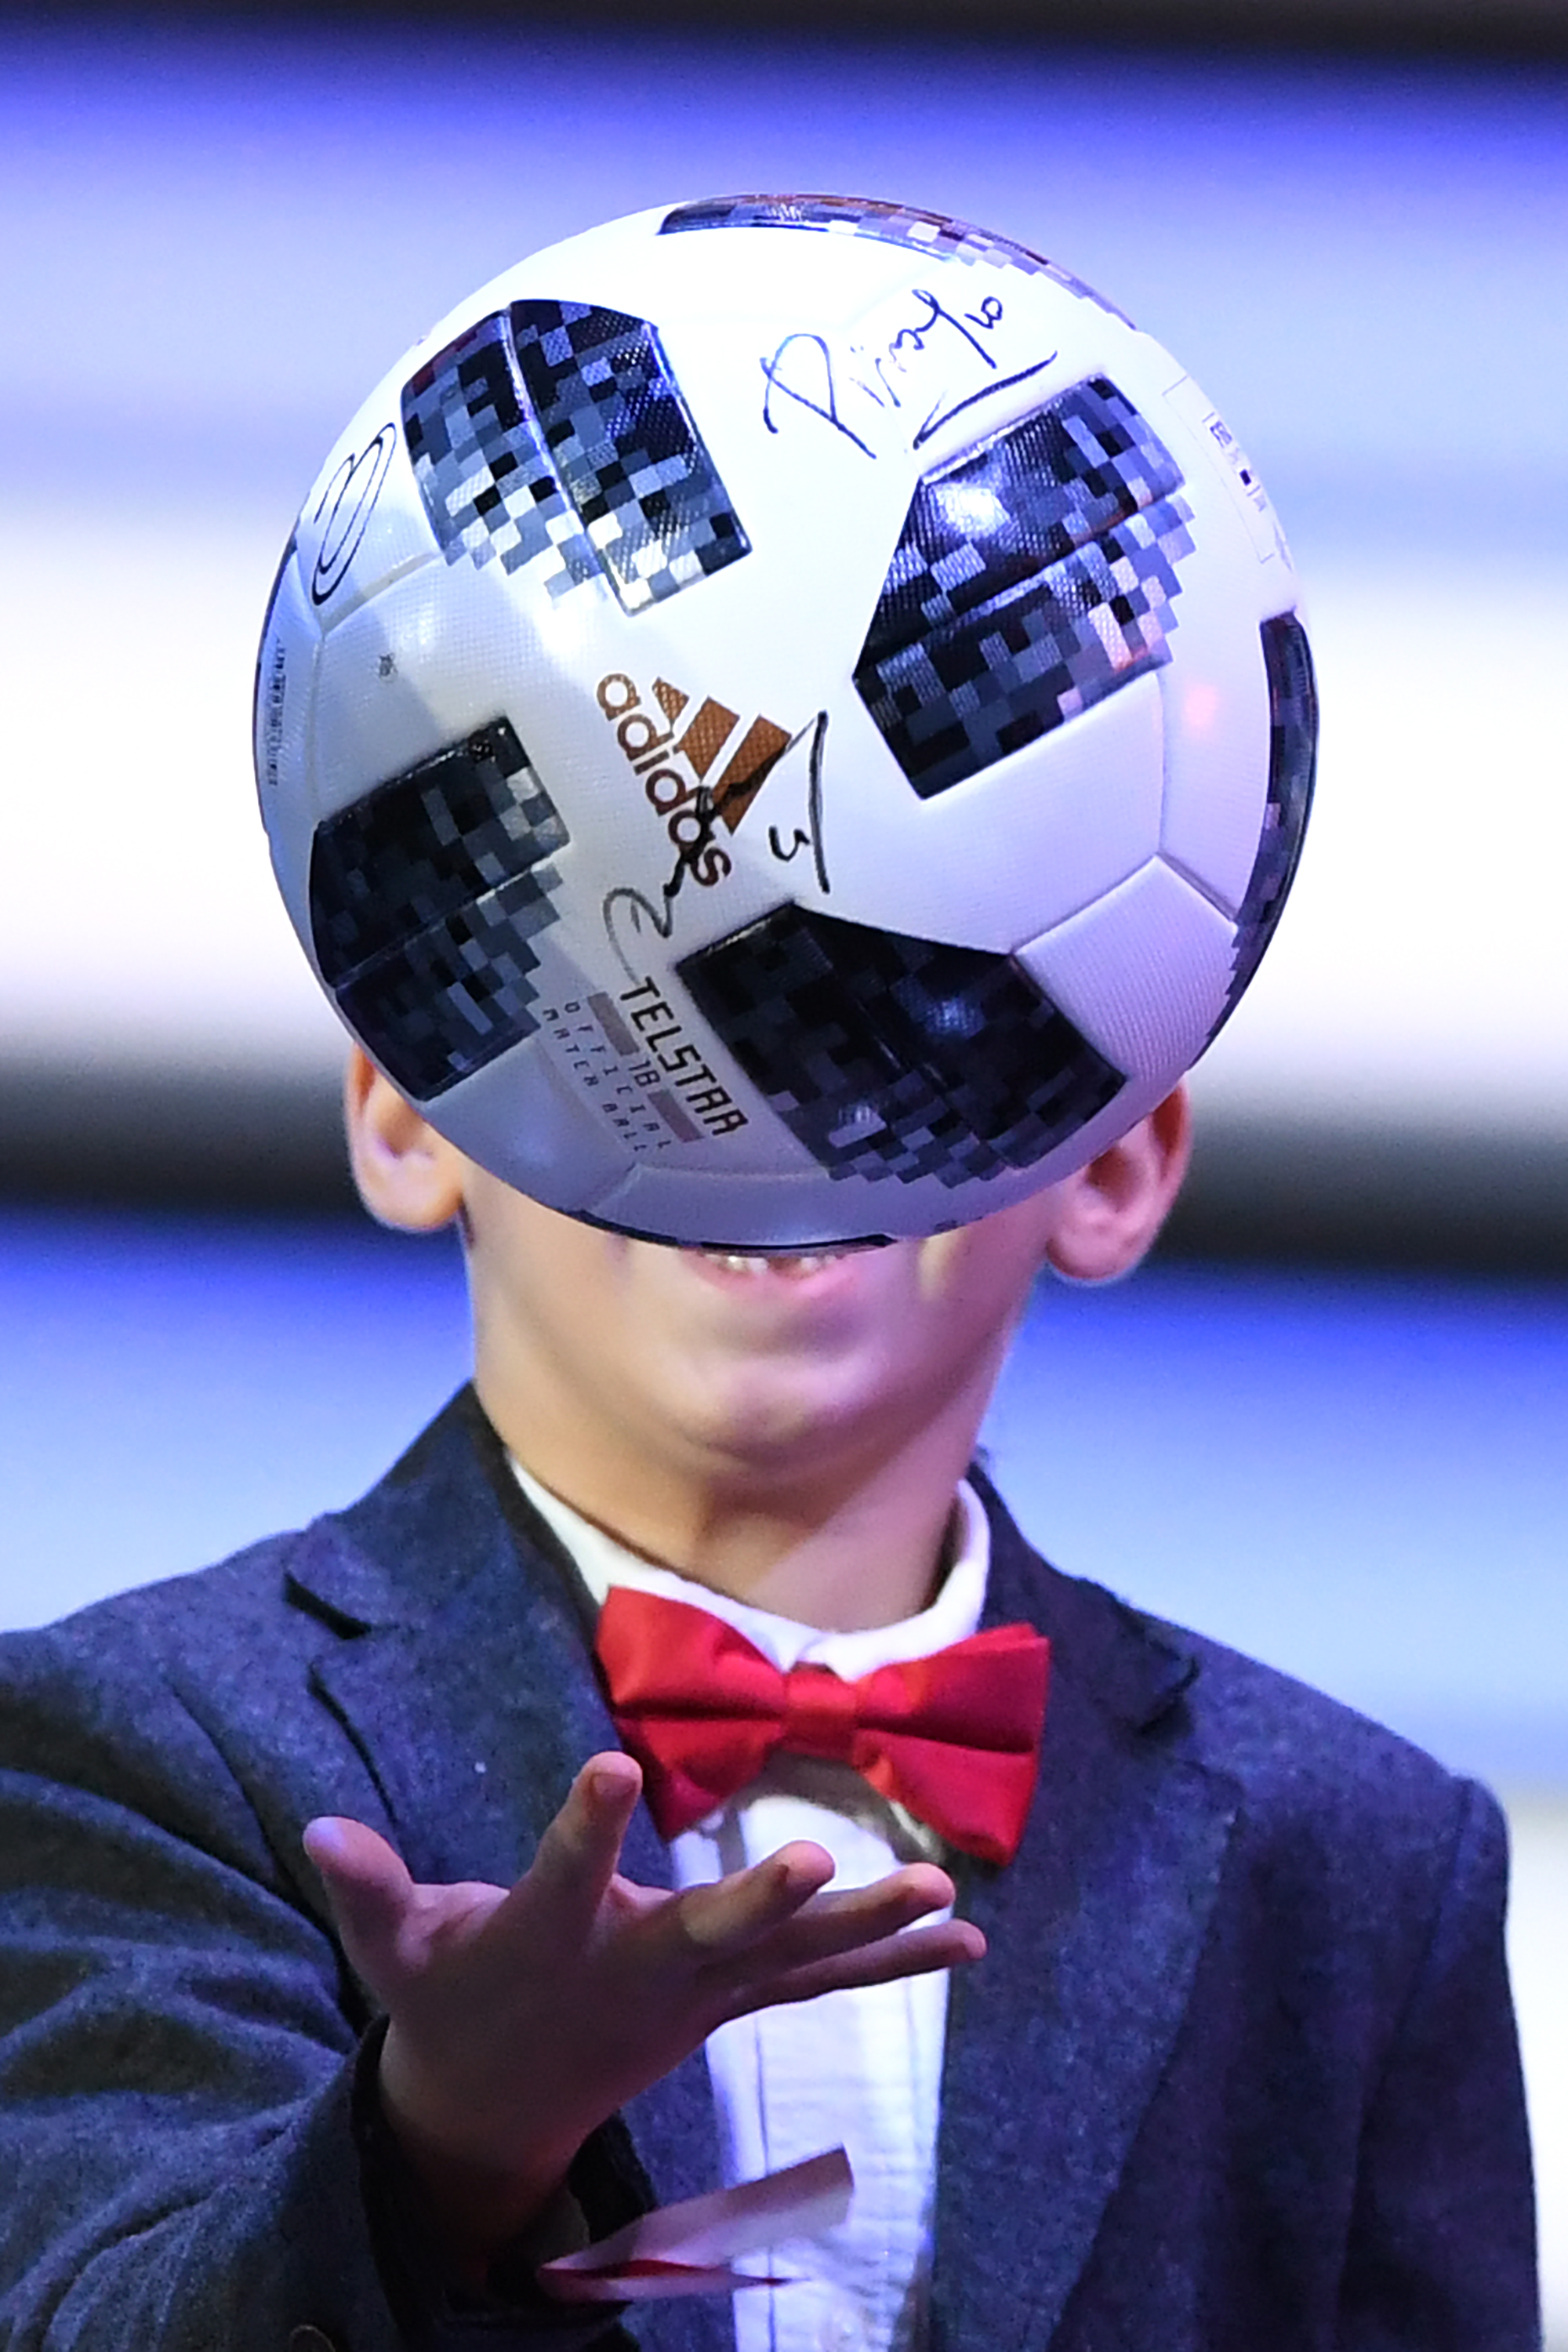 The official World Cup ball